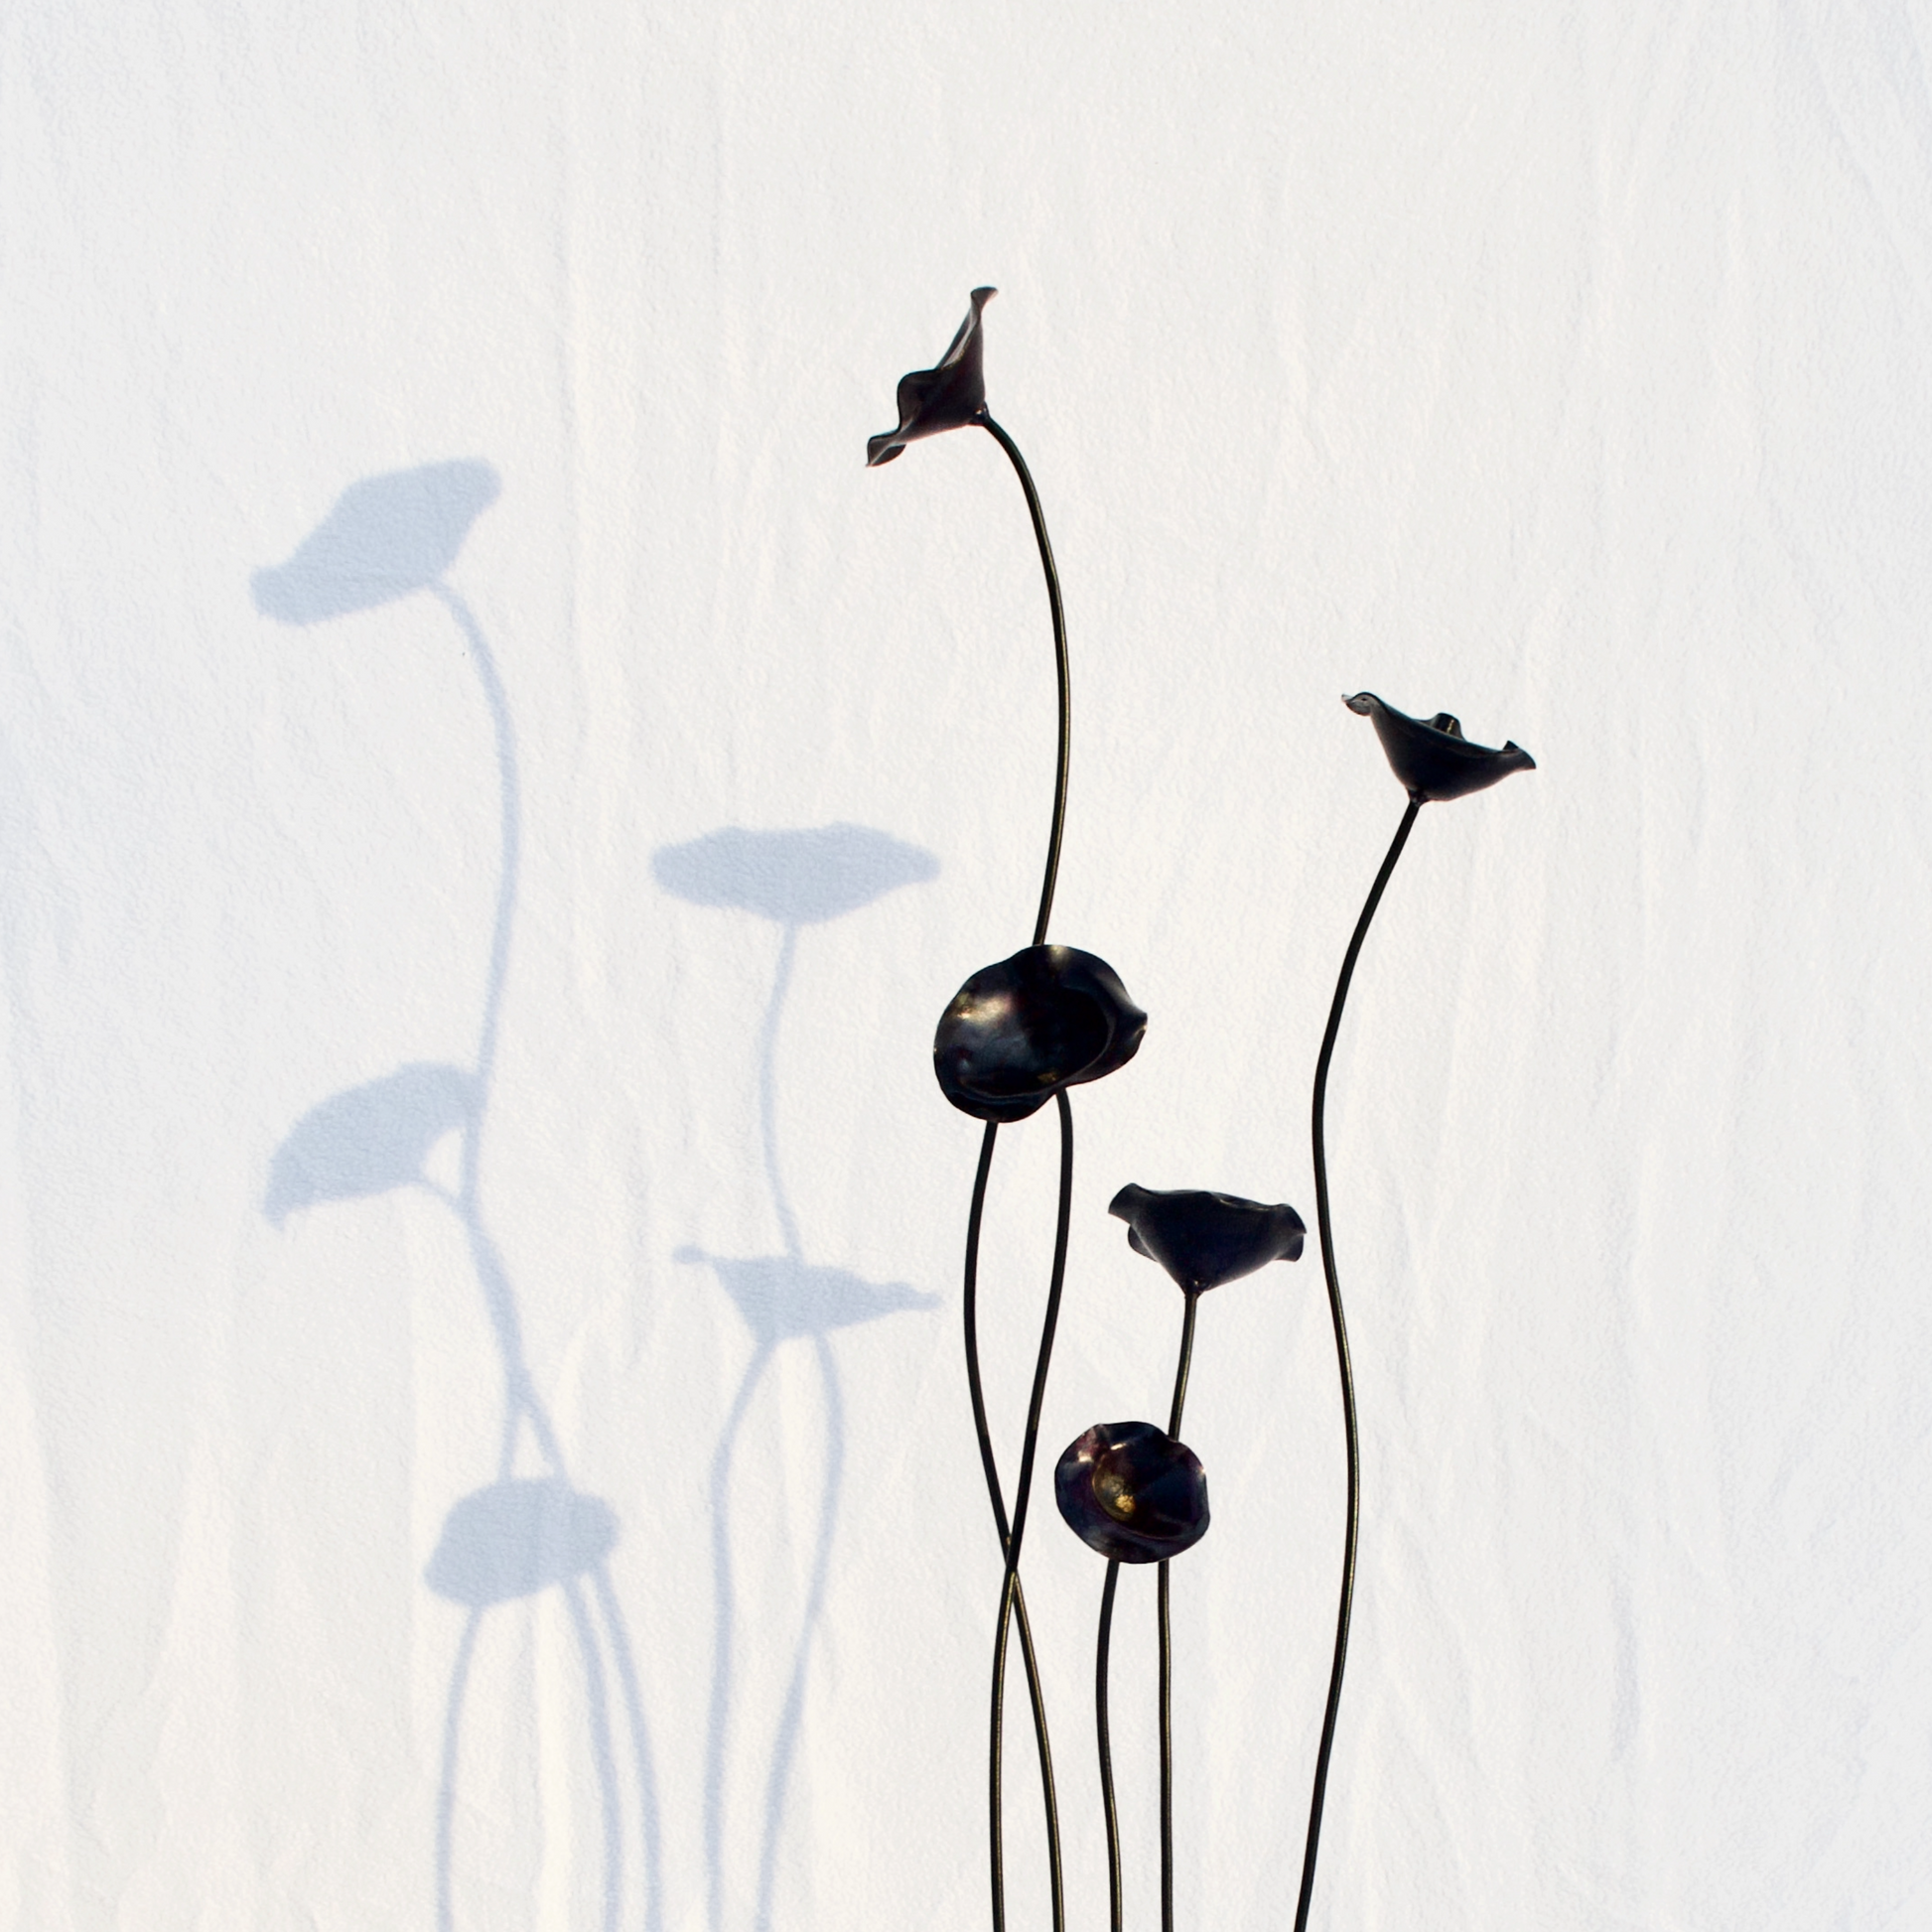 Large Steel Forged Poppy Sculpture. The flowers are violet with gold center.